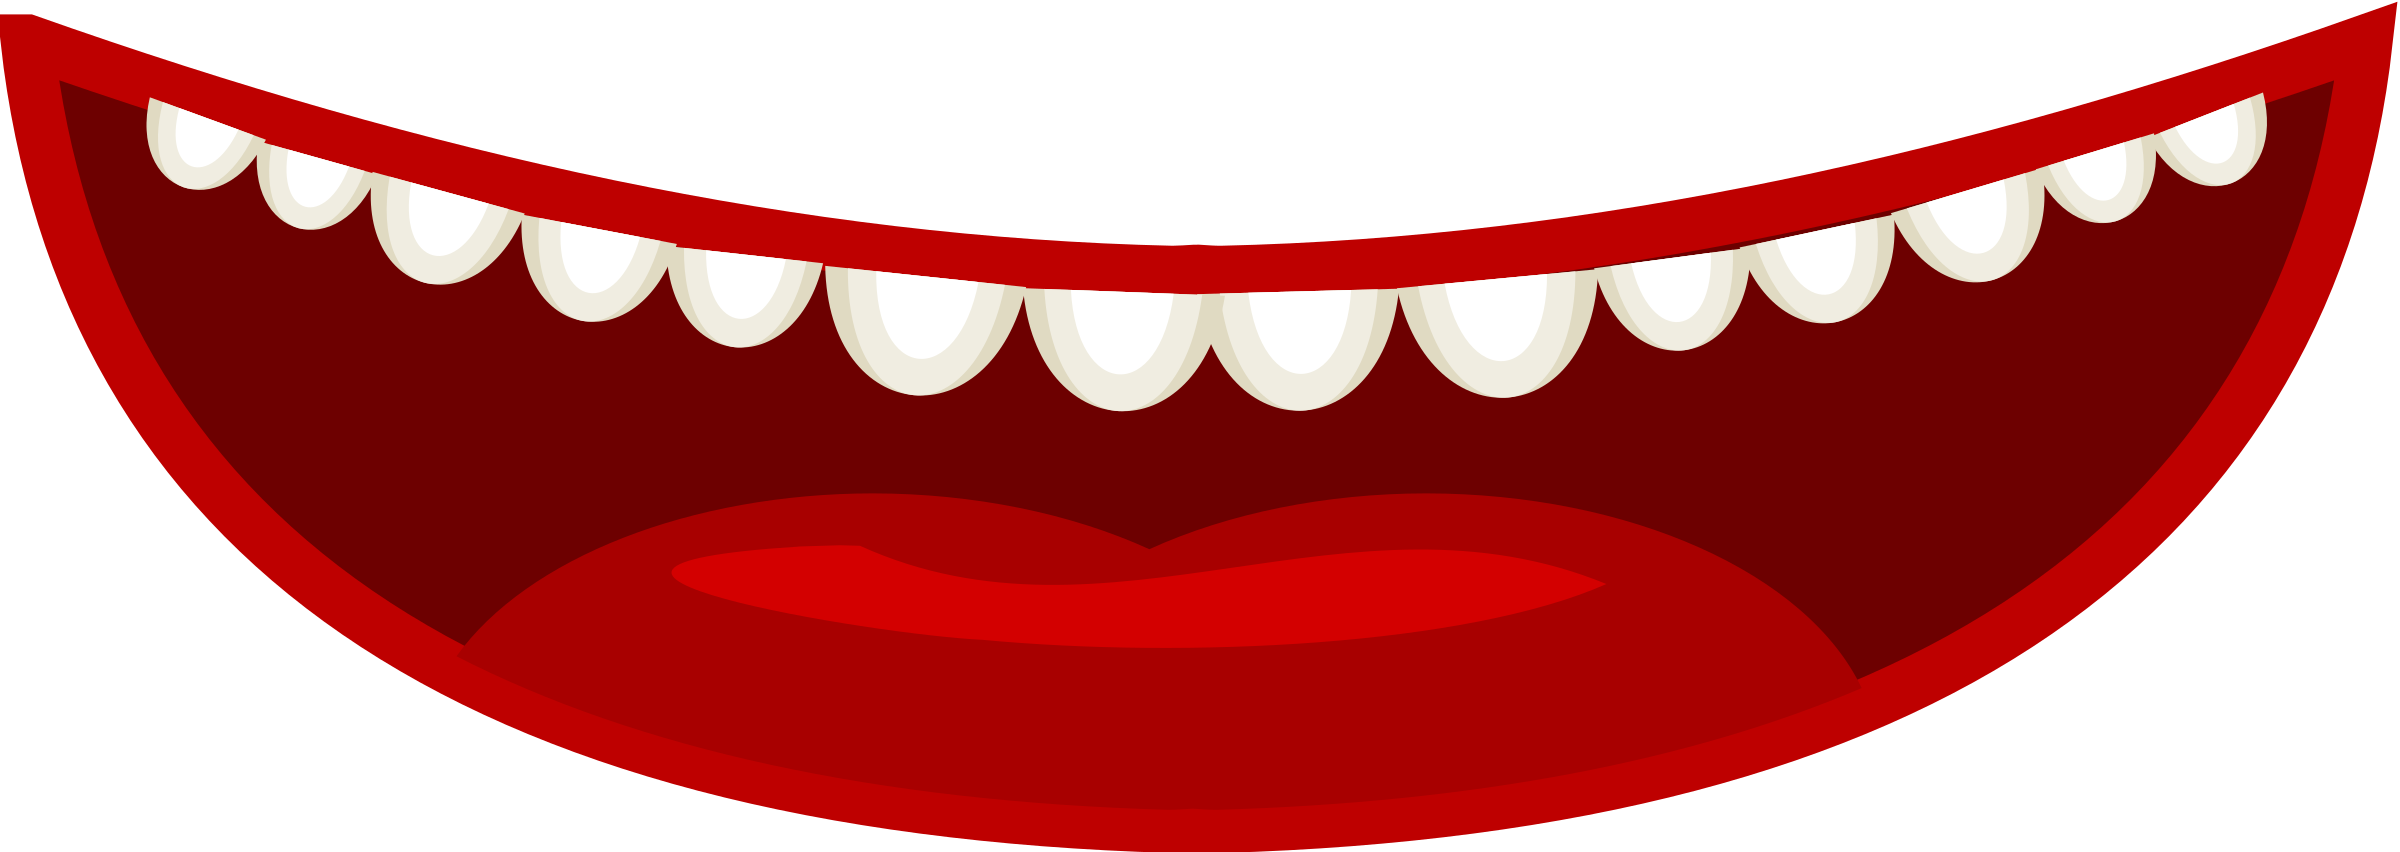 Clipart - Mouth in a cartoon style